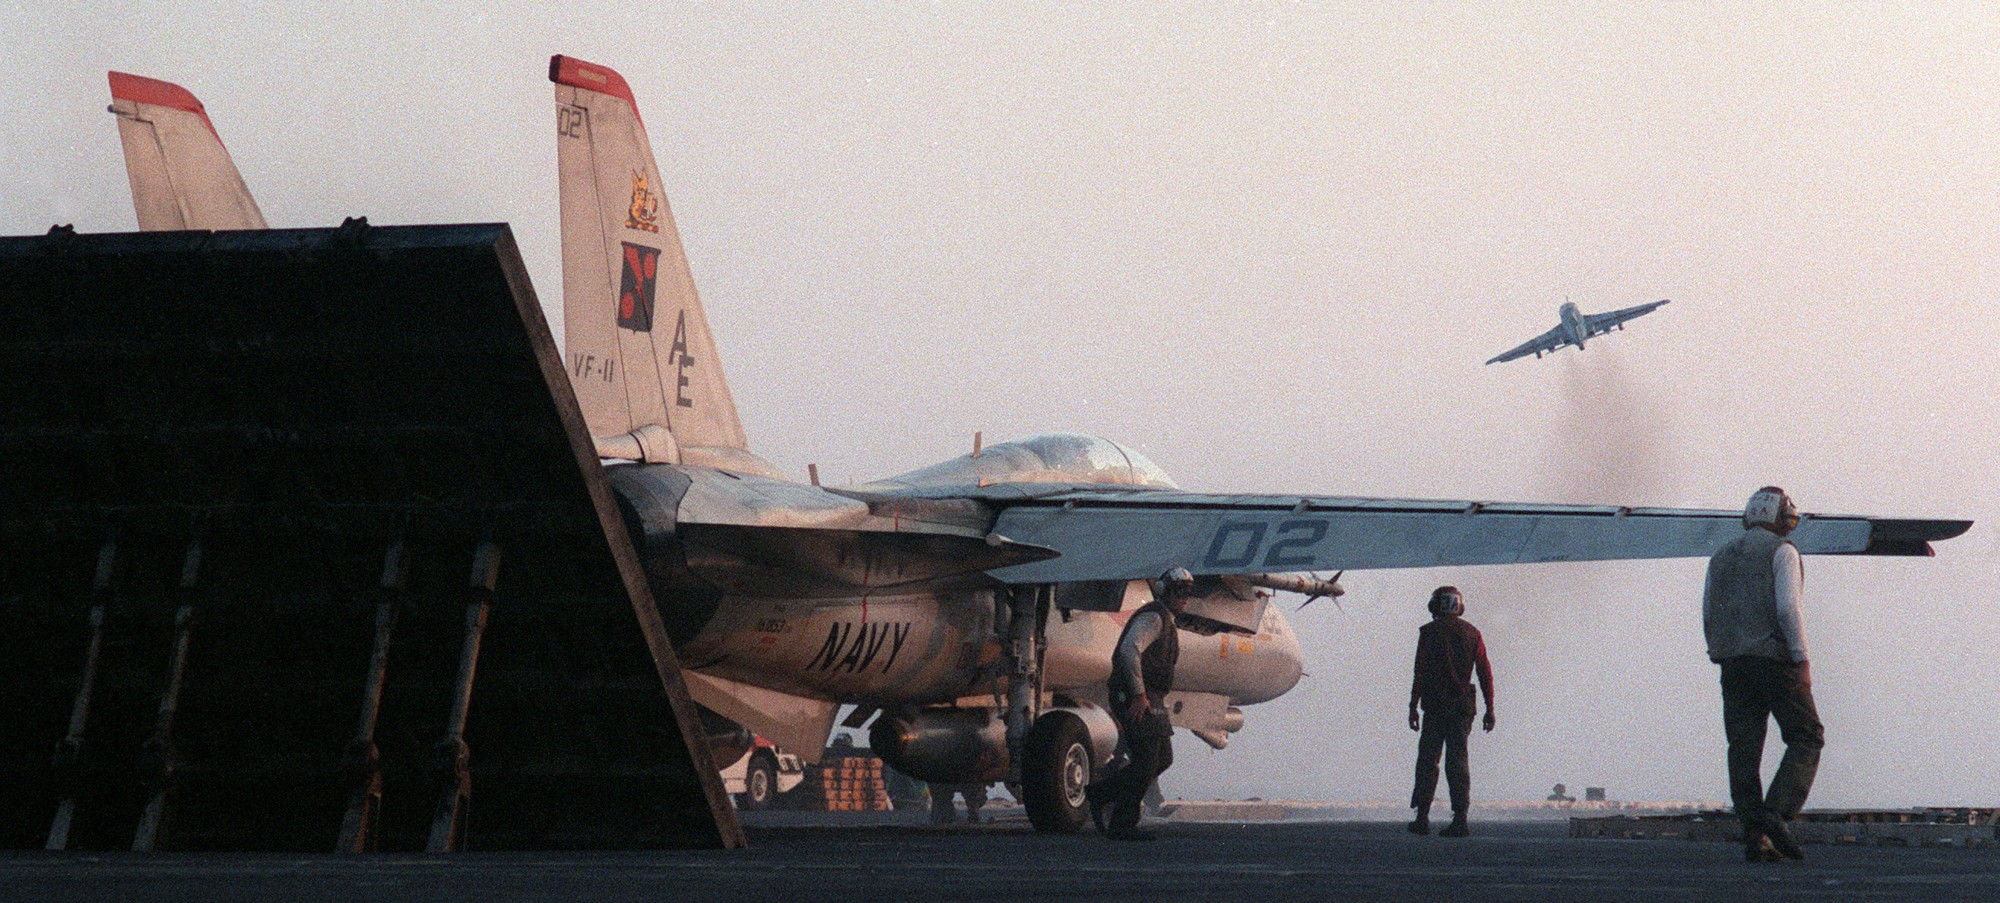 vf-11 red rippers fighter squadron us navy fitron f-14a tomcat carrier air wing cvw-6 uss forrestal cv-59 exercise west wind 1988